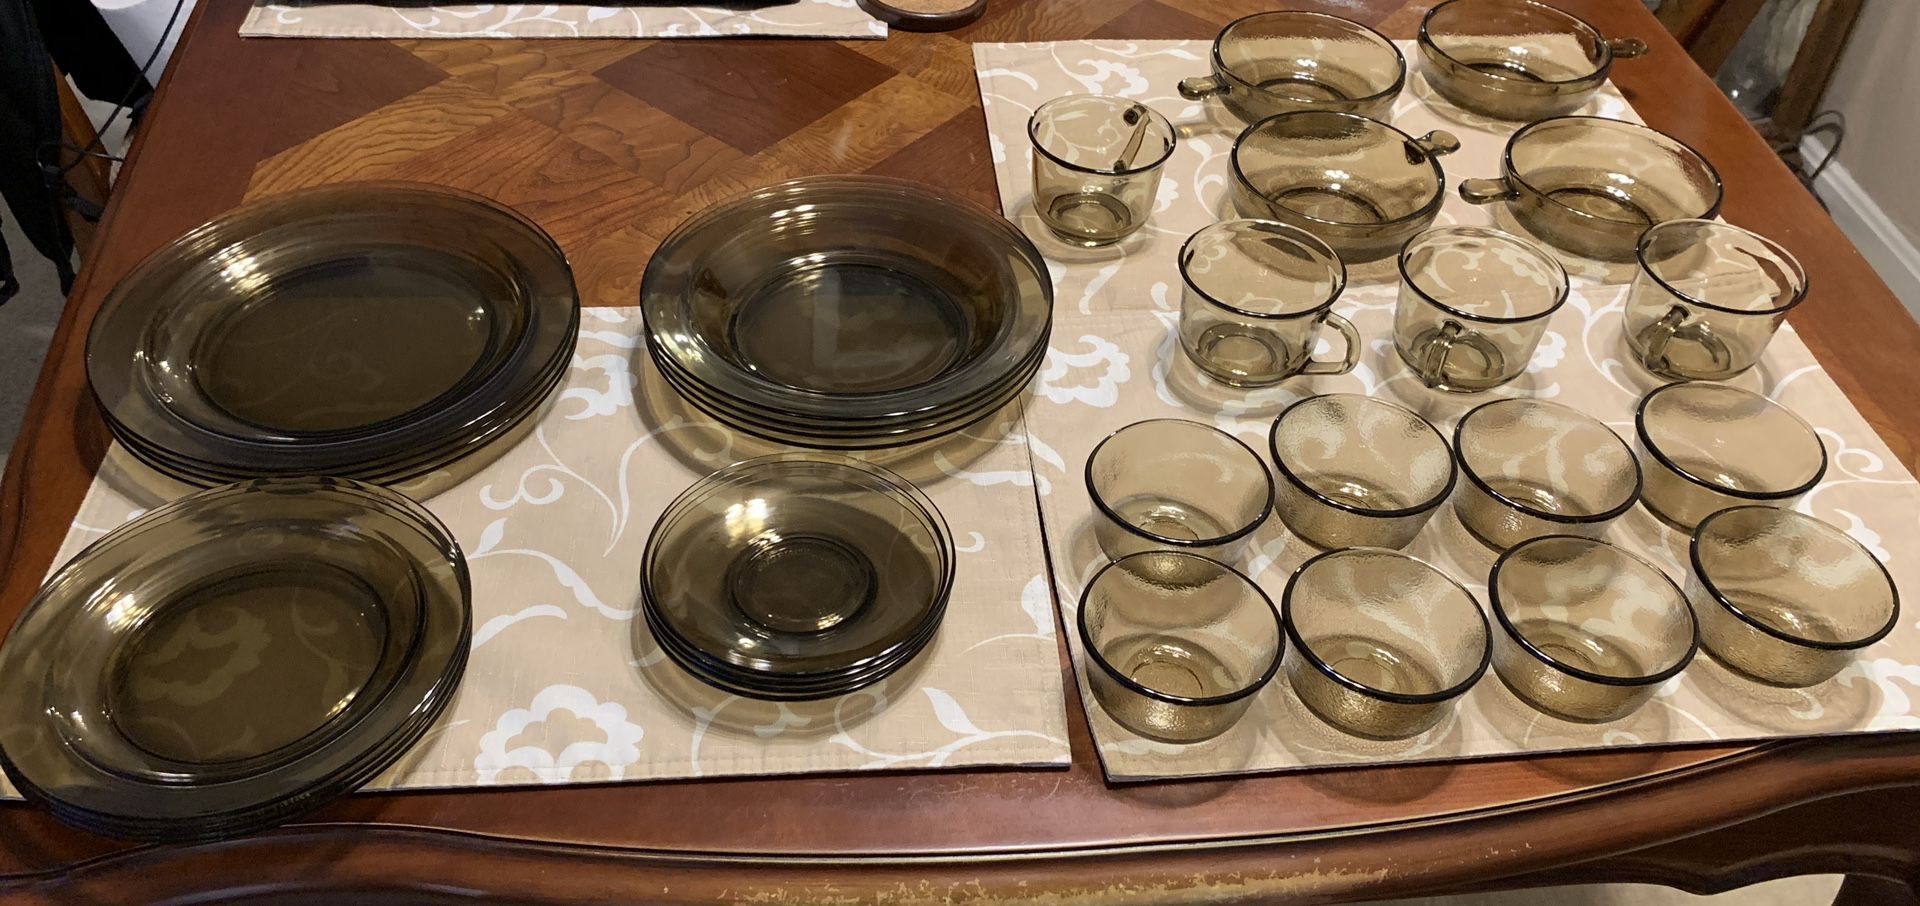 Pyrex Visions Amber Brown 32-piece Dining Set - $150.00/OBO